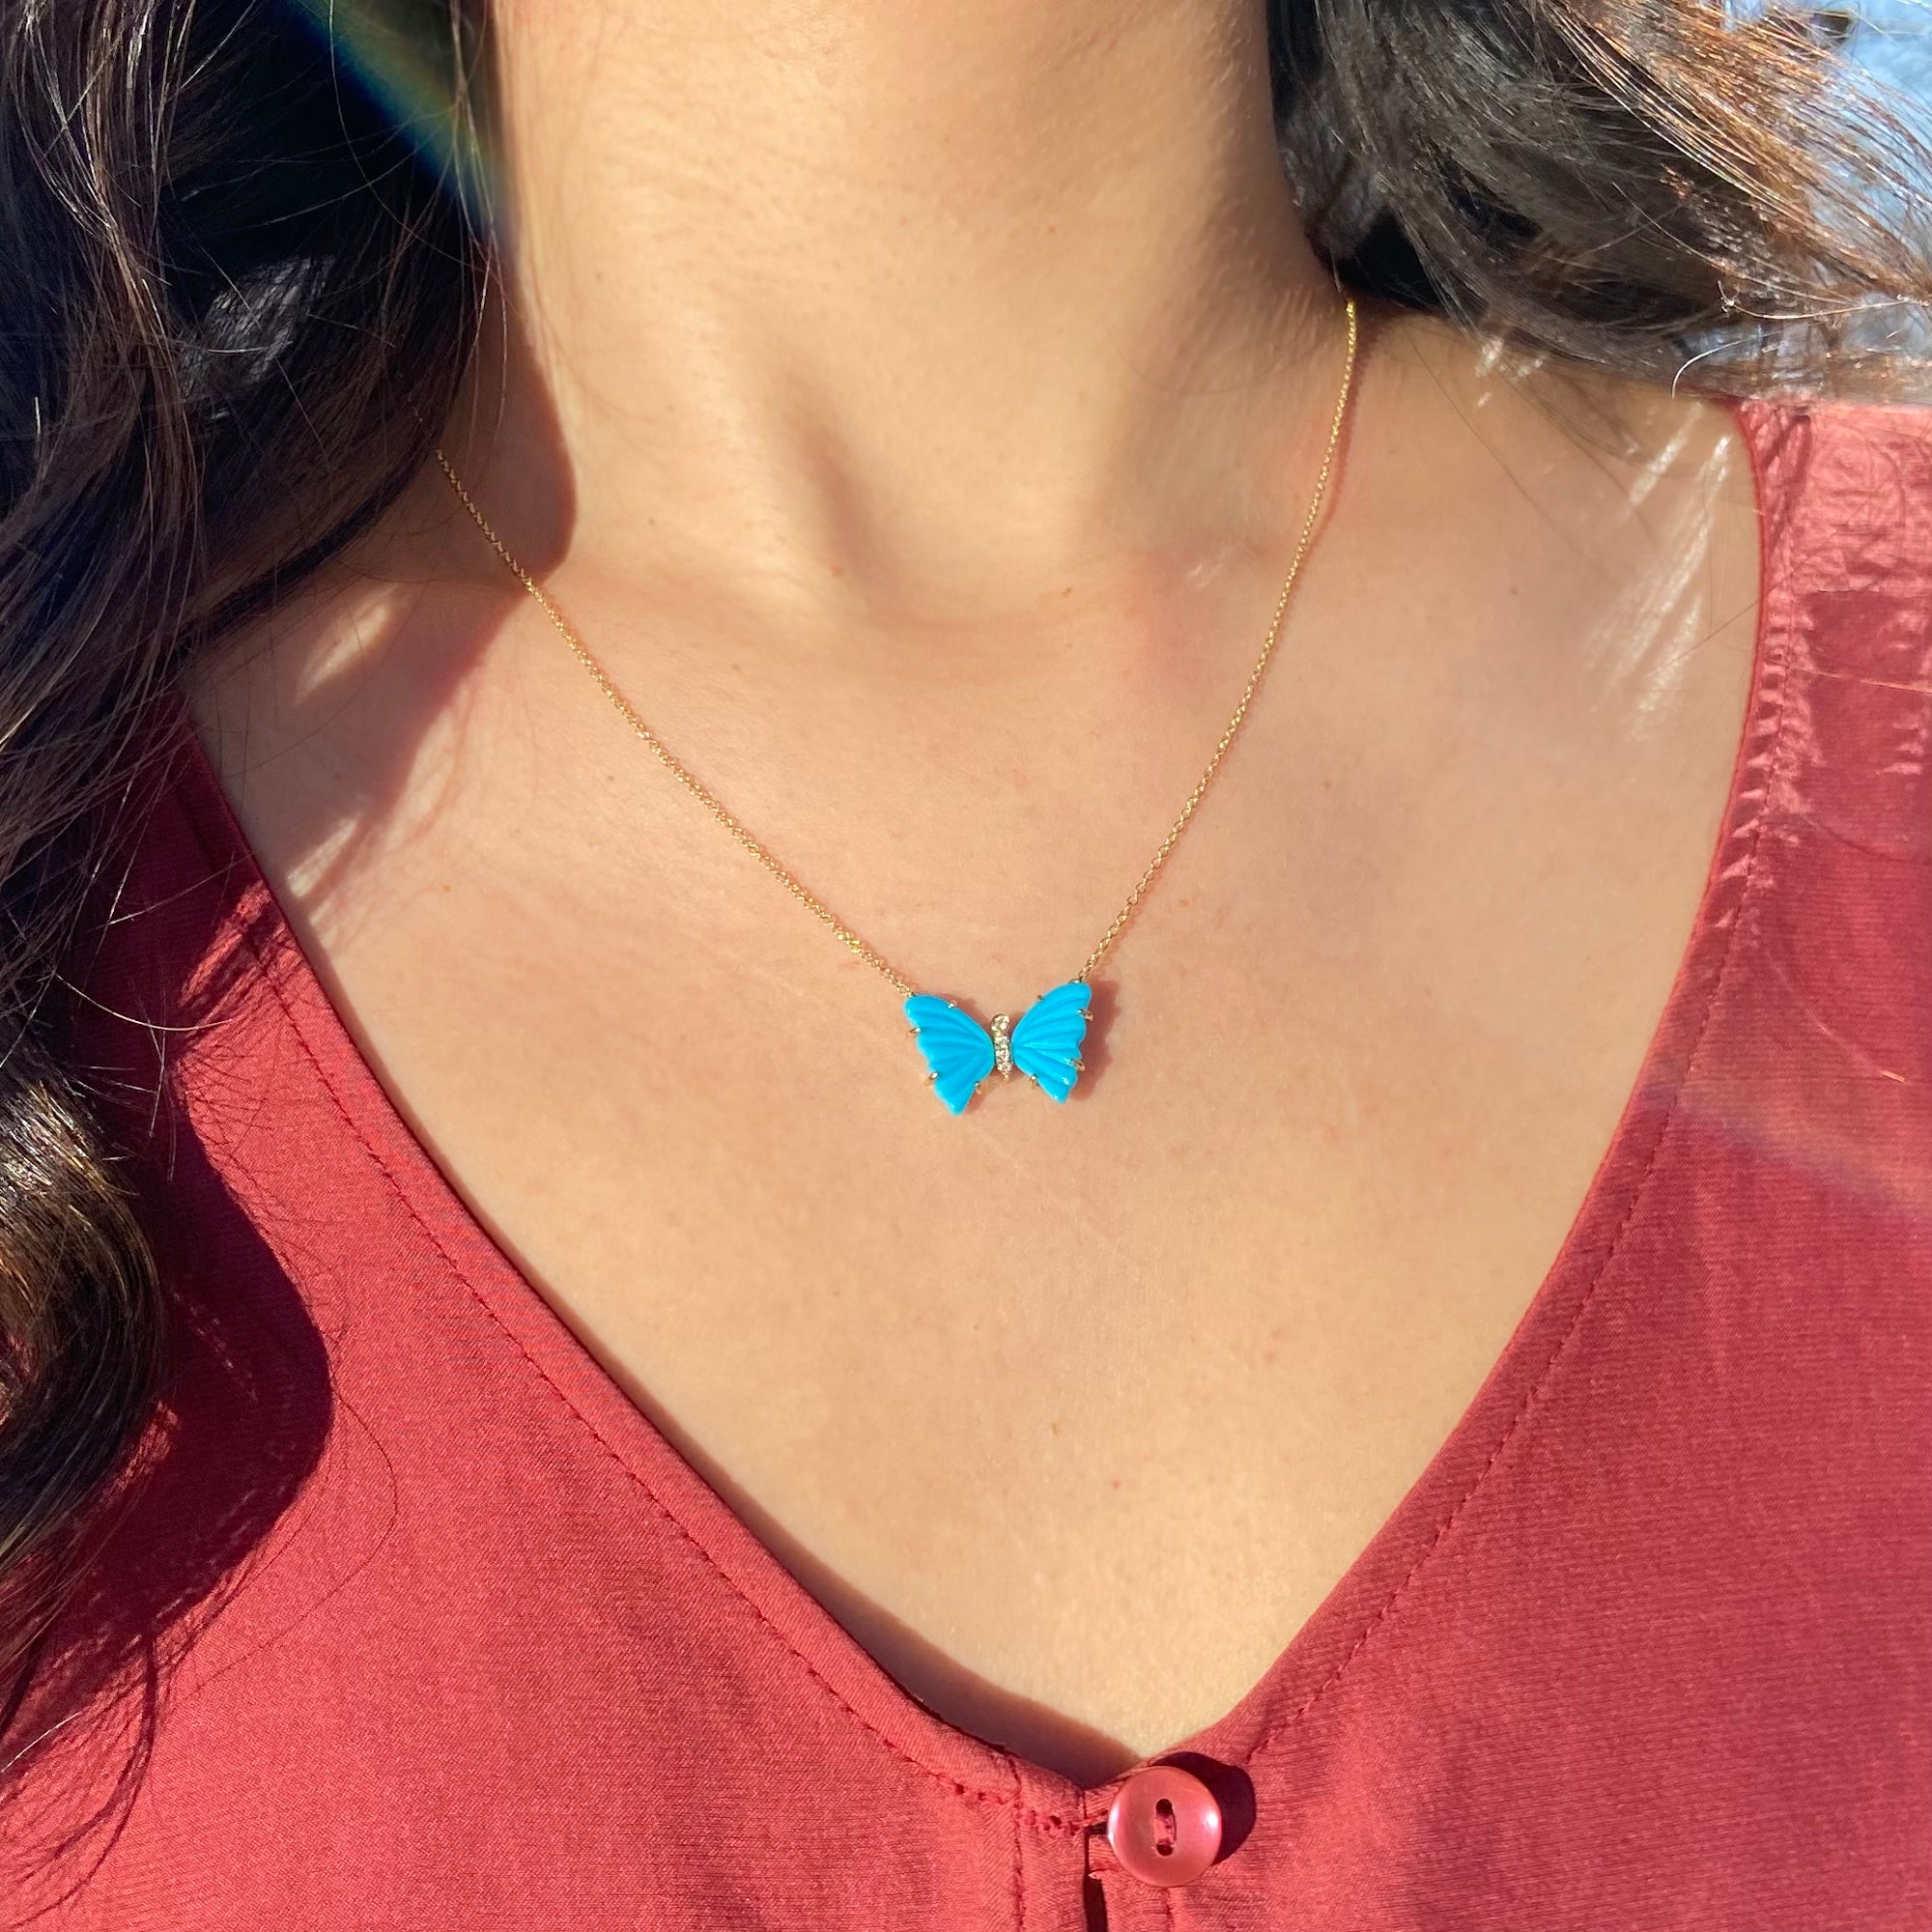 mini pronged butterfly necklace with diamonds in turquoise